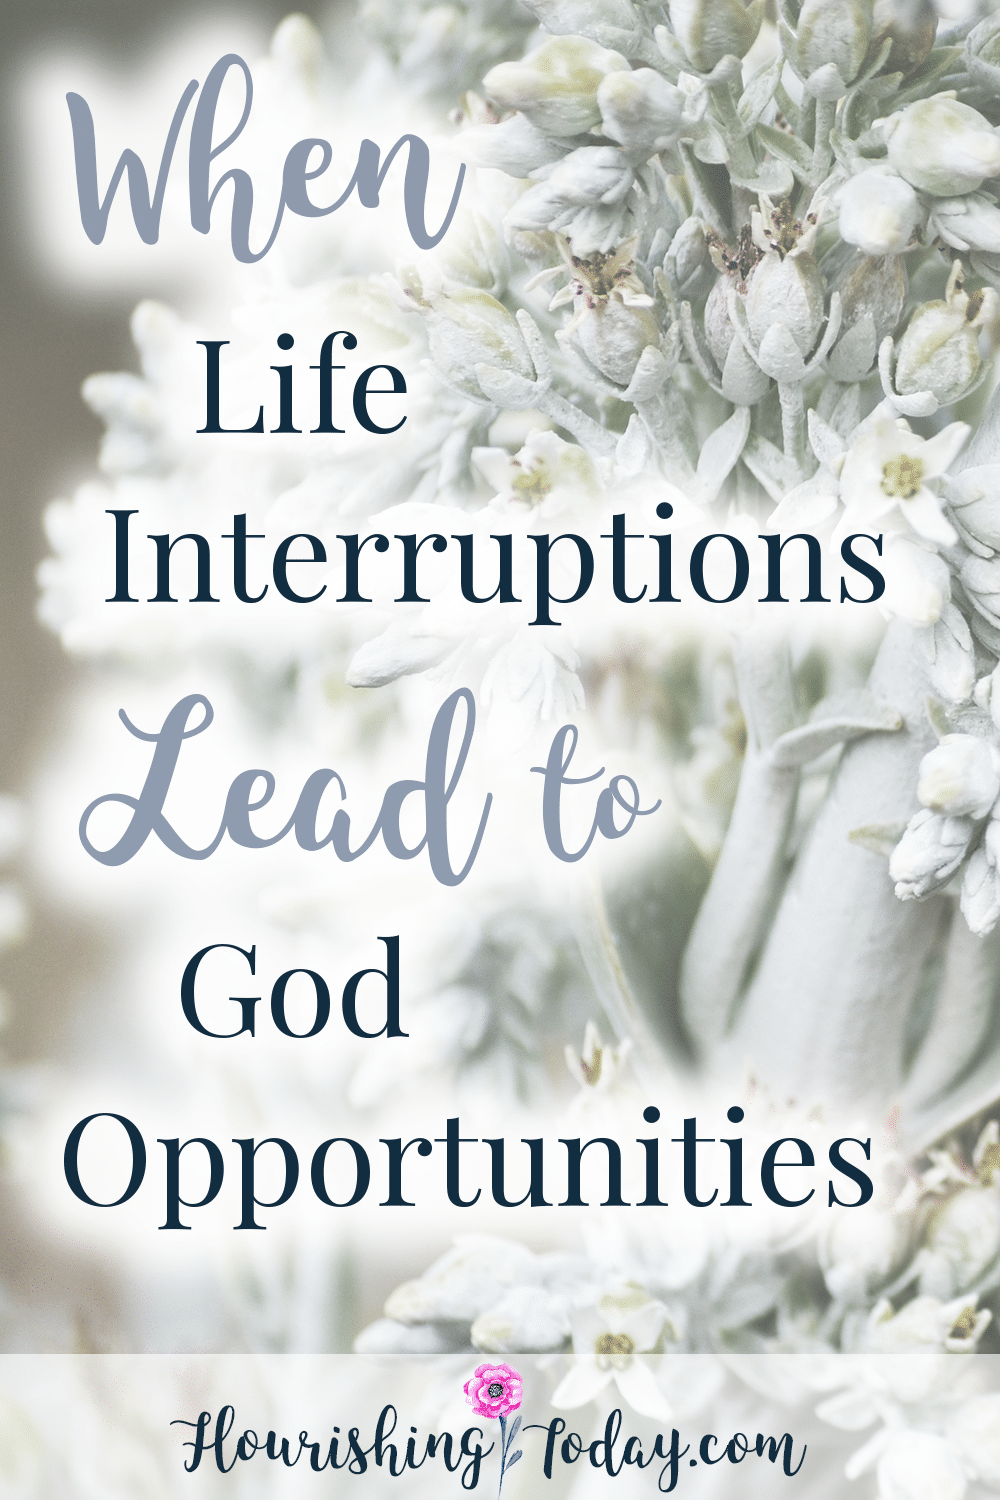 Do you feel like life is full of interruptions? While life's interruptions can make us uncomfortable, they can also open the door for God opportunities.